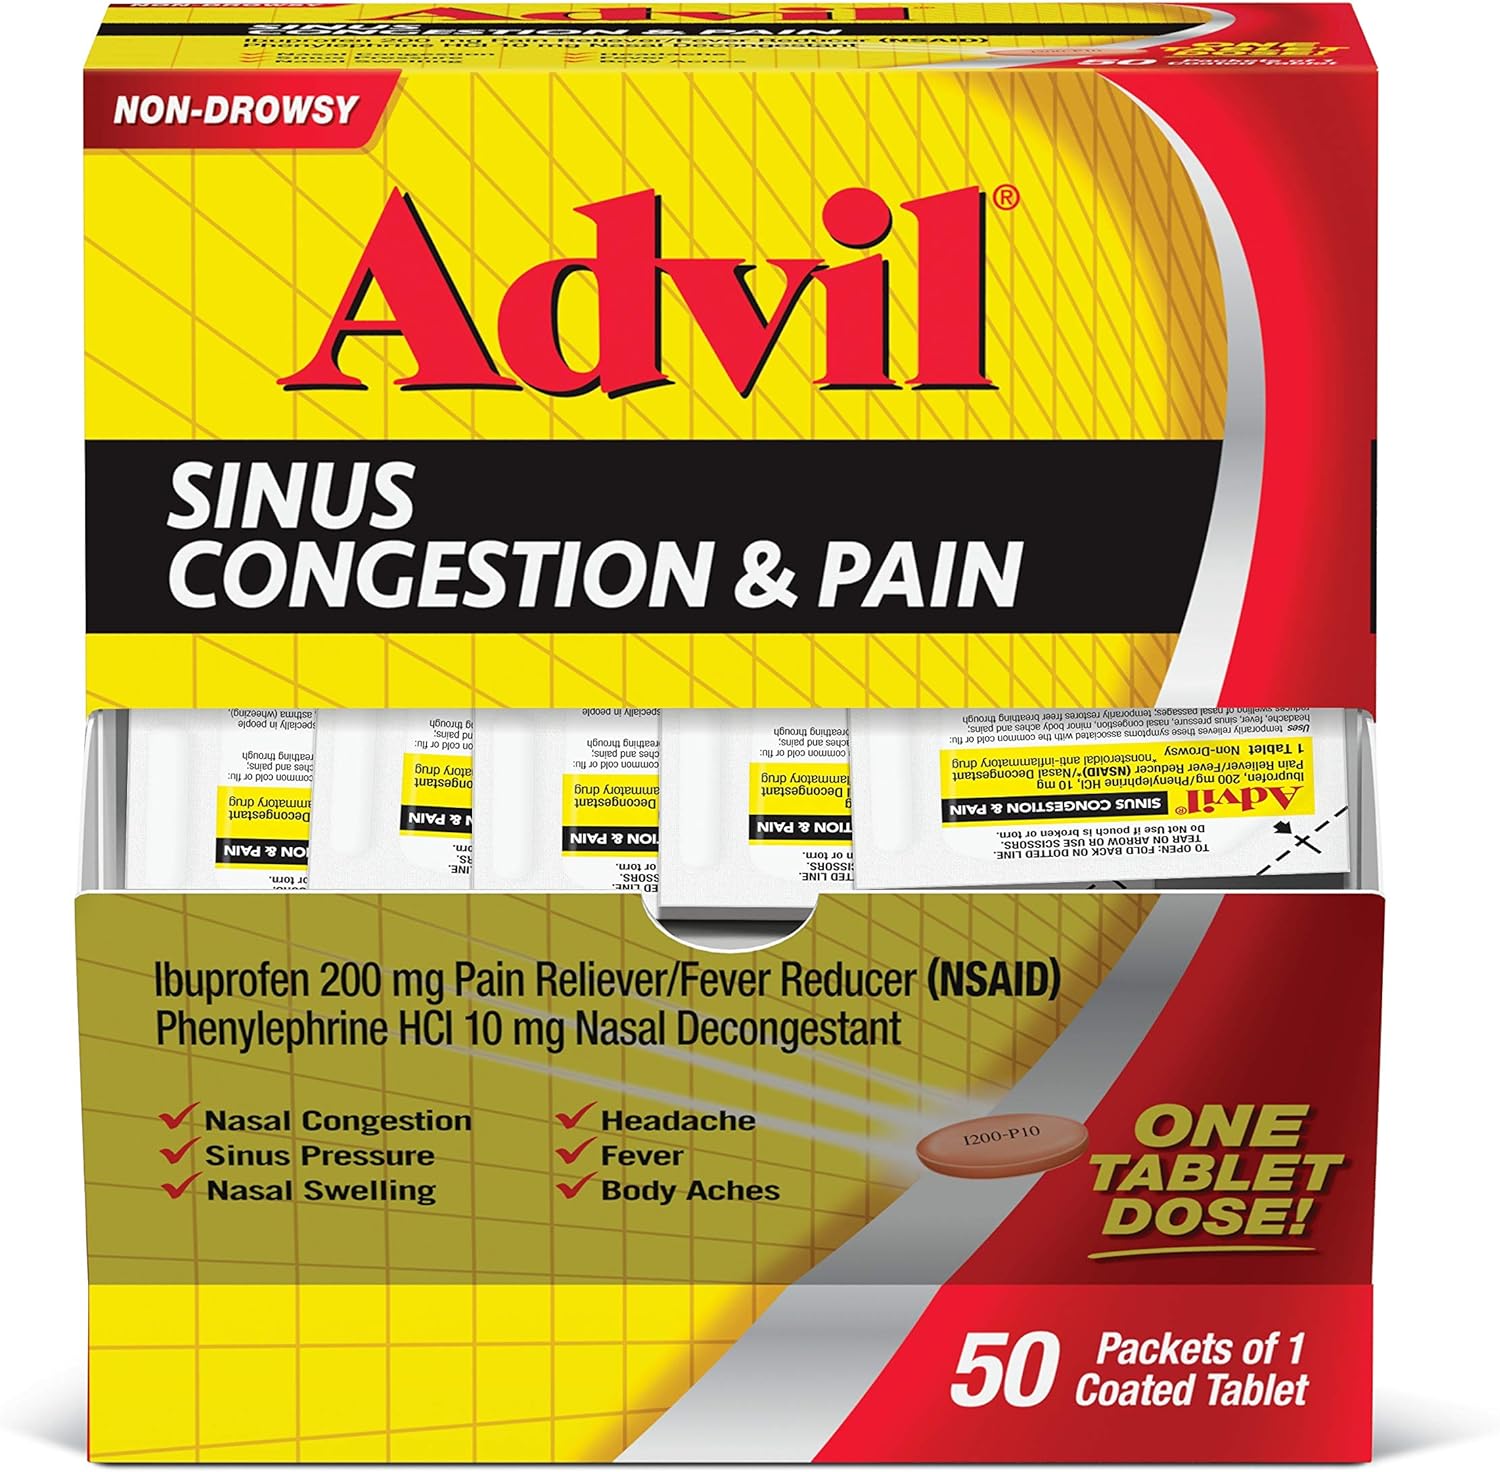 Advil Sinus Congestion and Pain, Sinus Relief Medicine, Pain Reliever and Fever Reducer with Ibuprofen and Phenylephrine HCl - 50 Coated Tablets